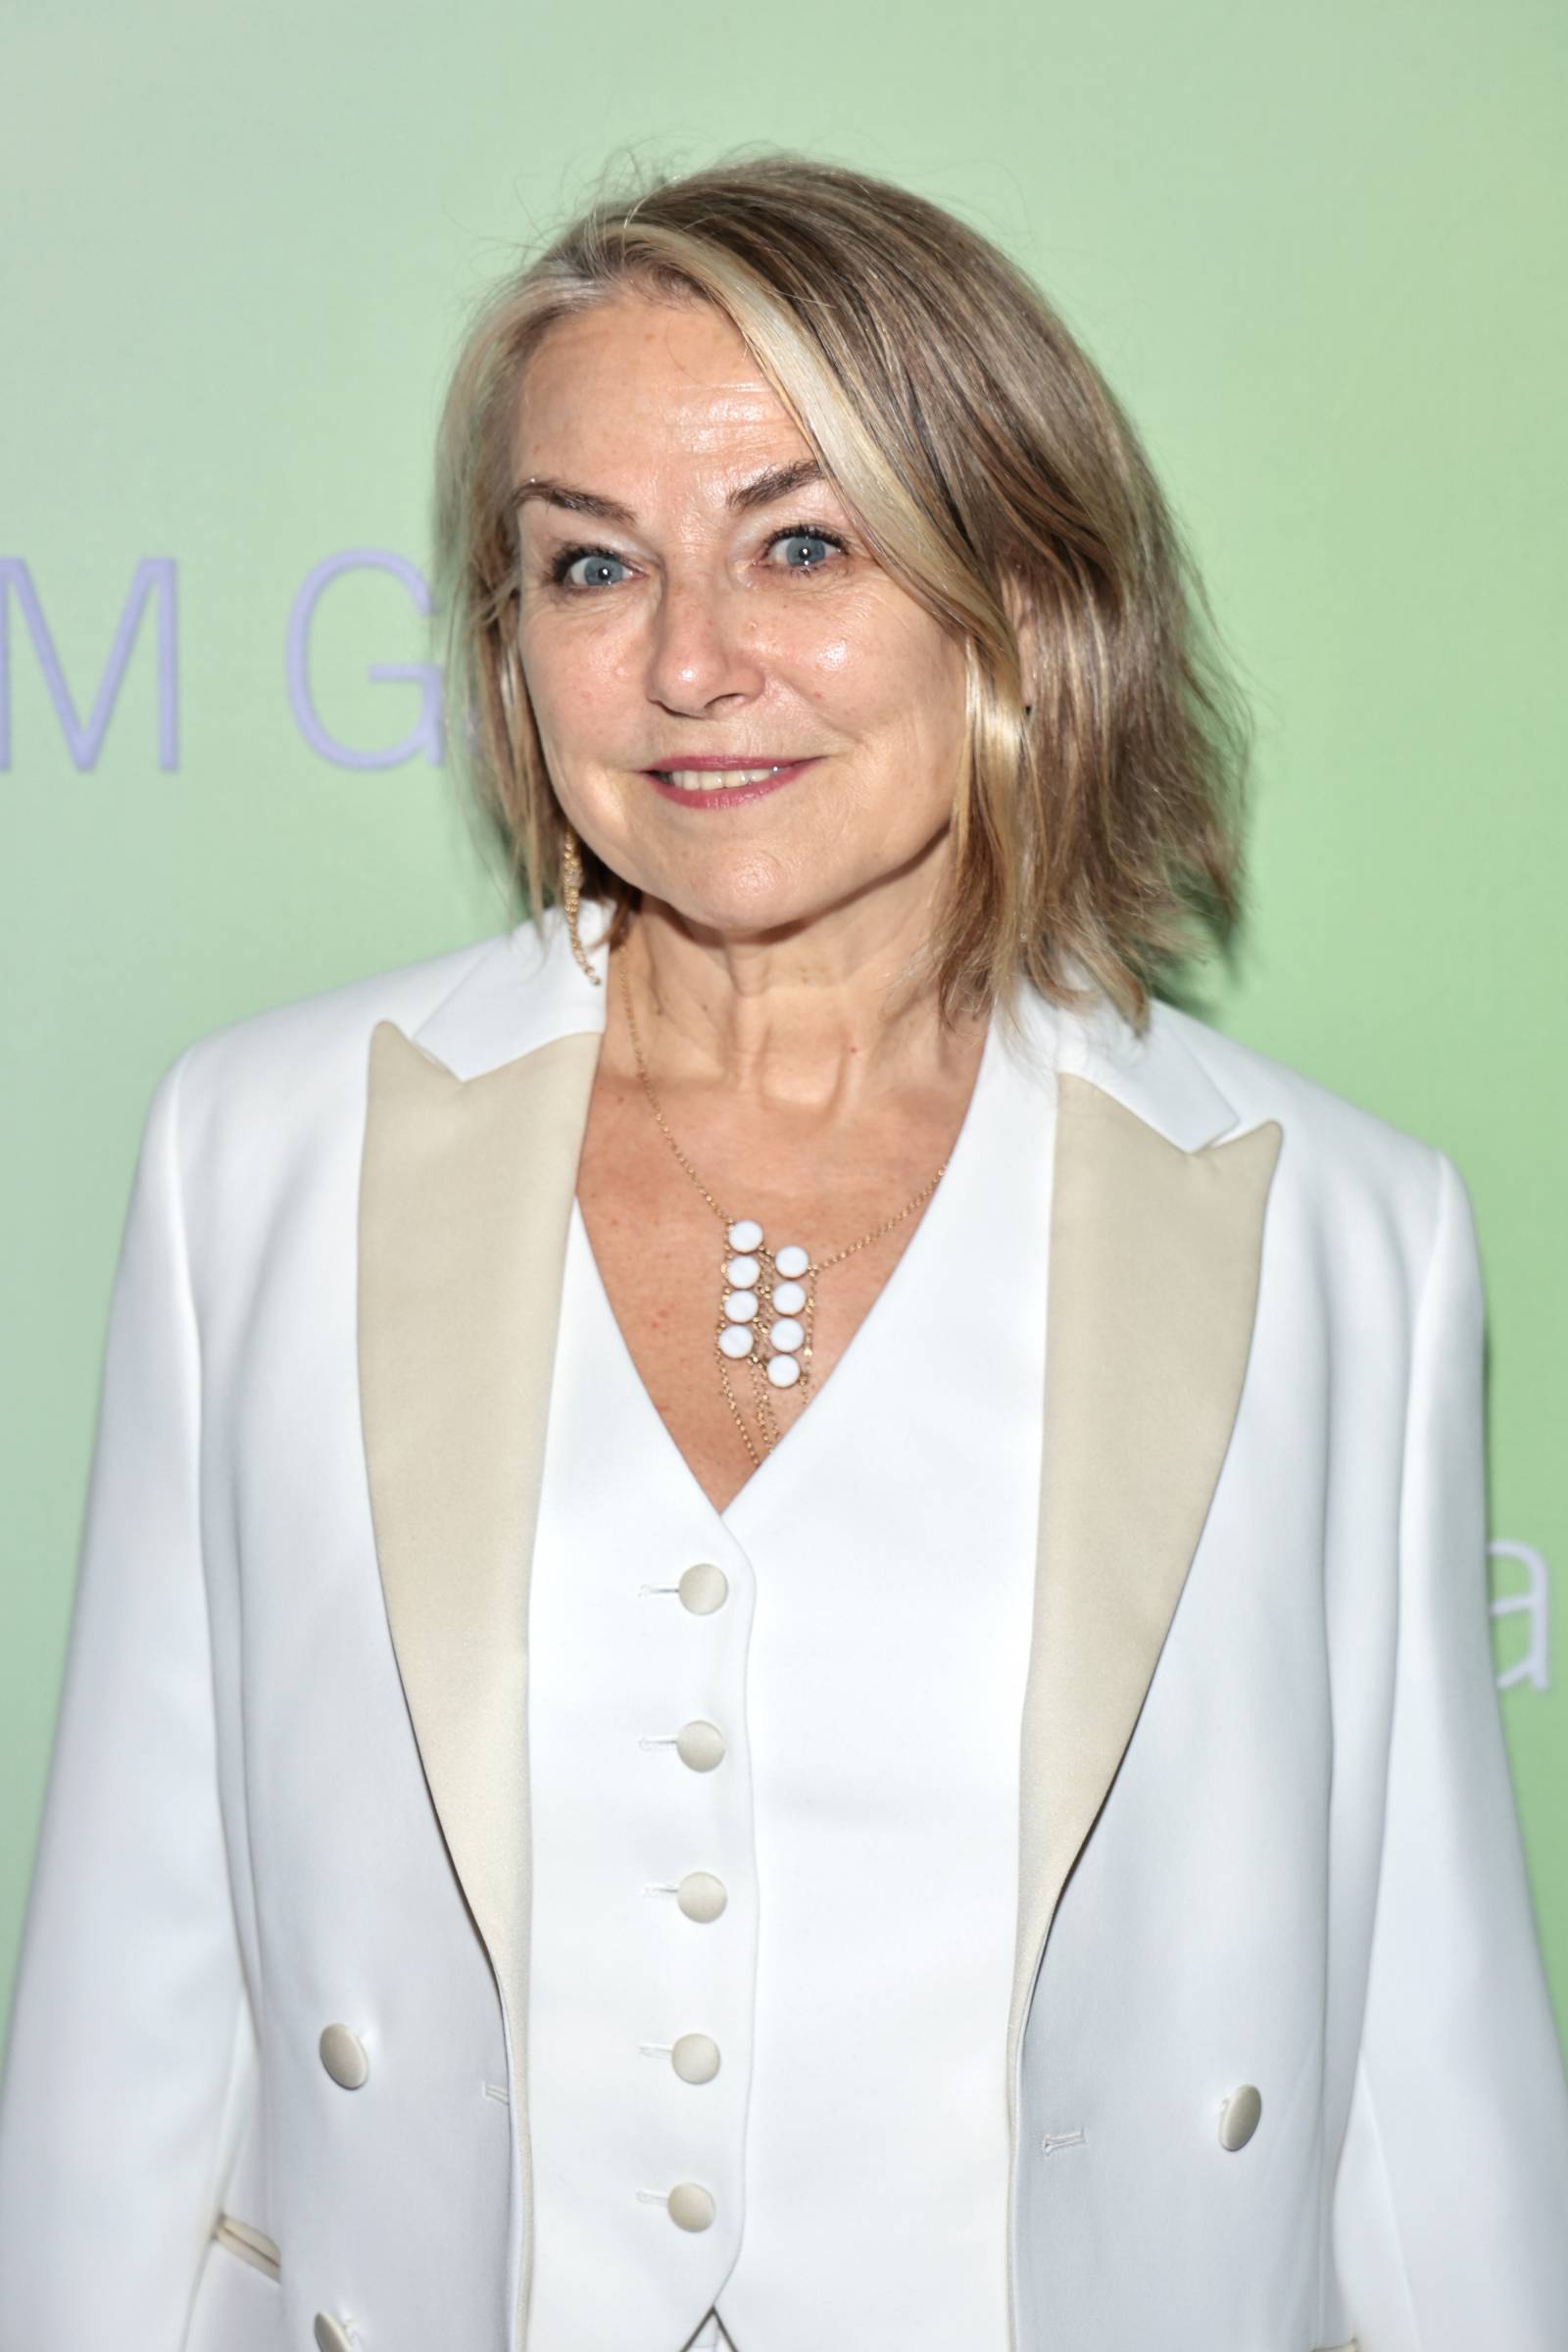 Esther Perel / Fot. Getty Images